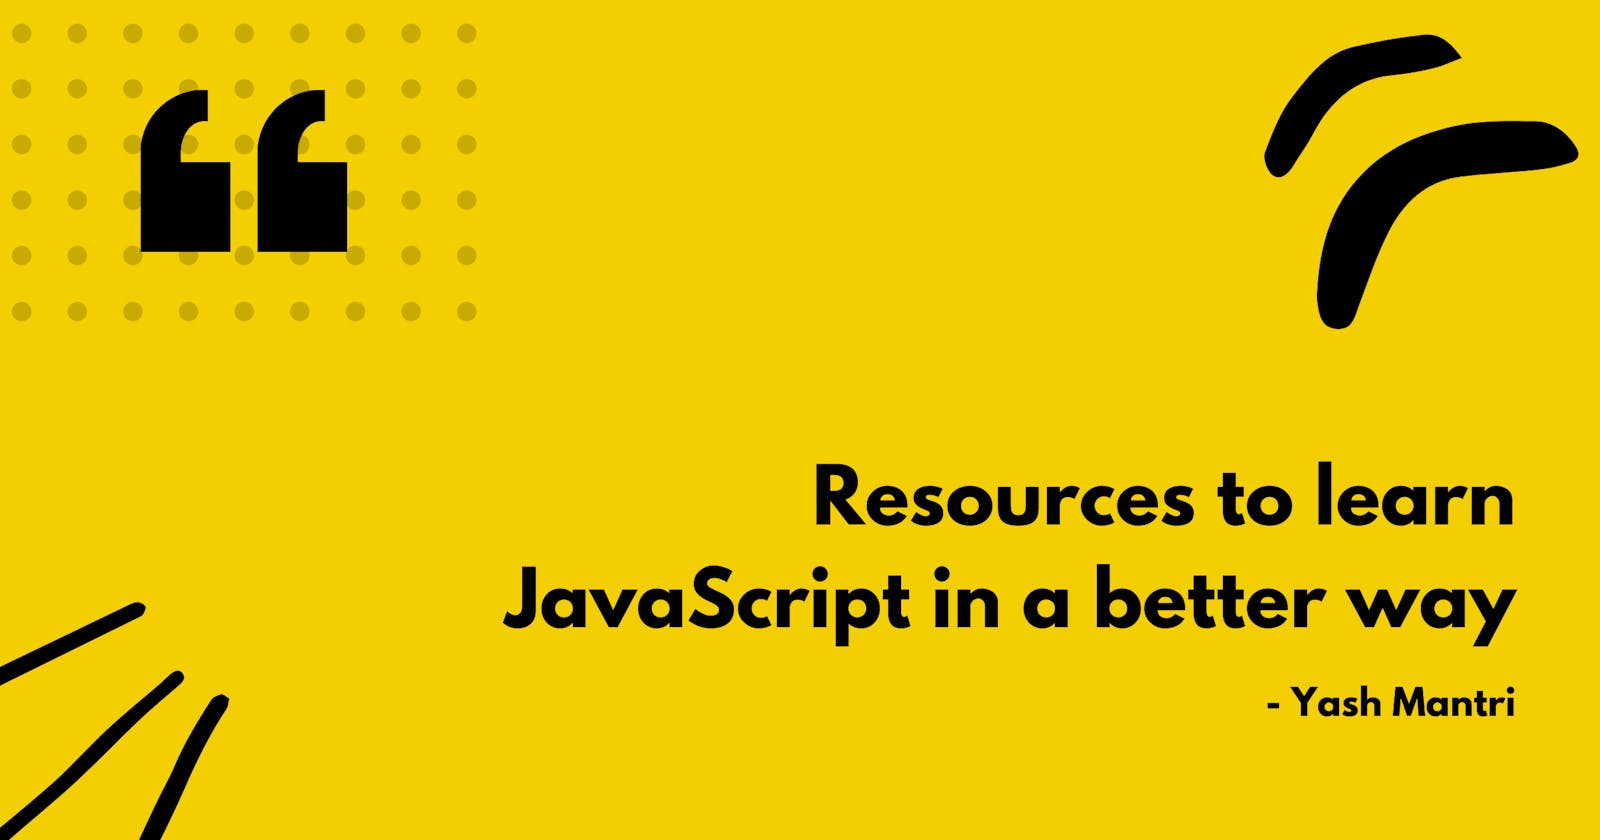 Resources to learn JavaScript in a better way